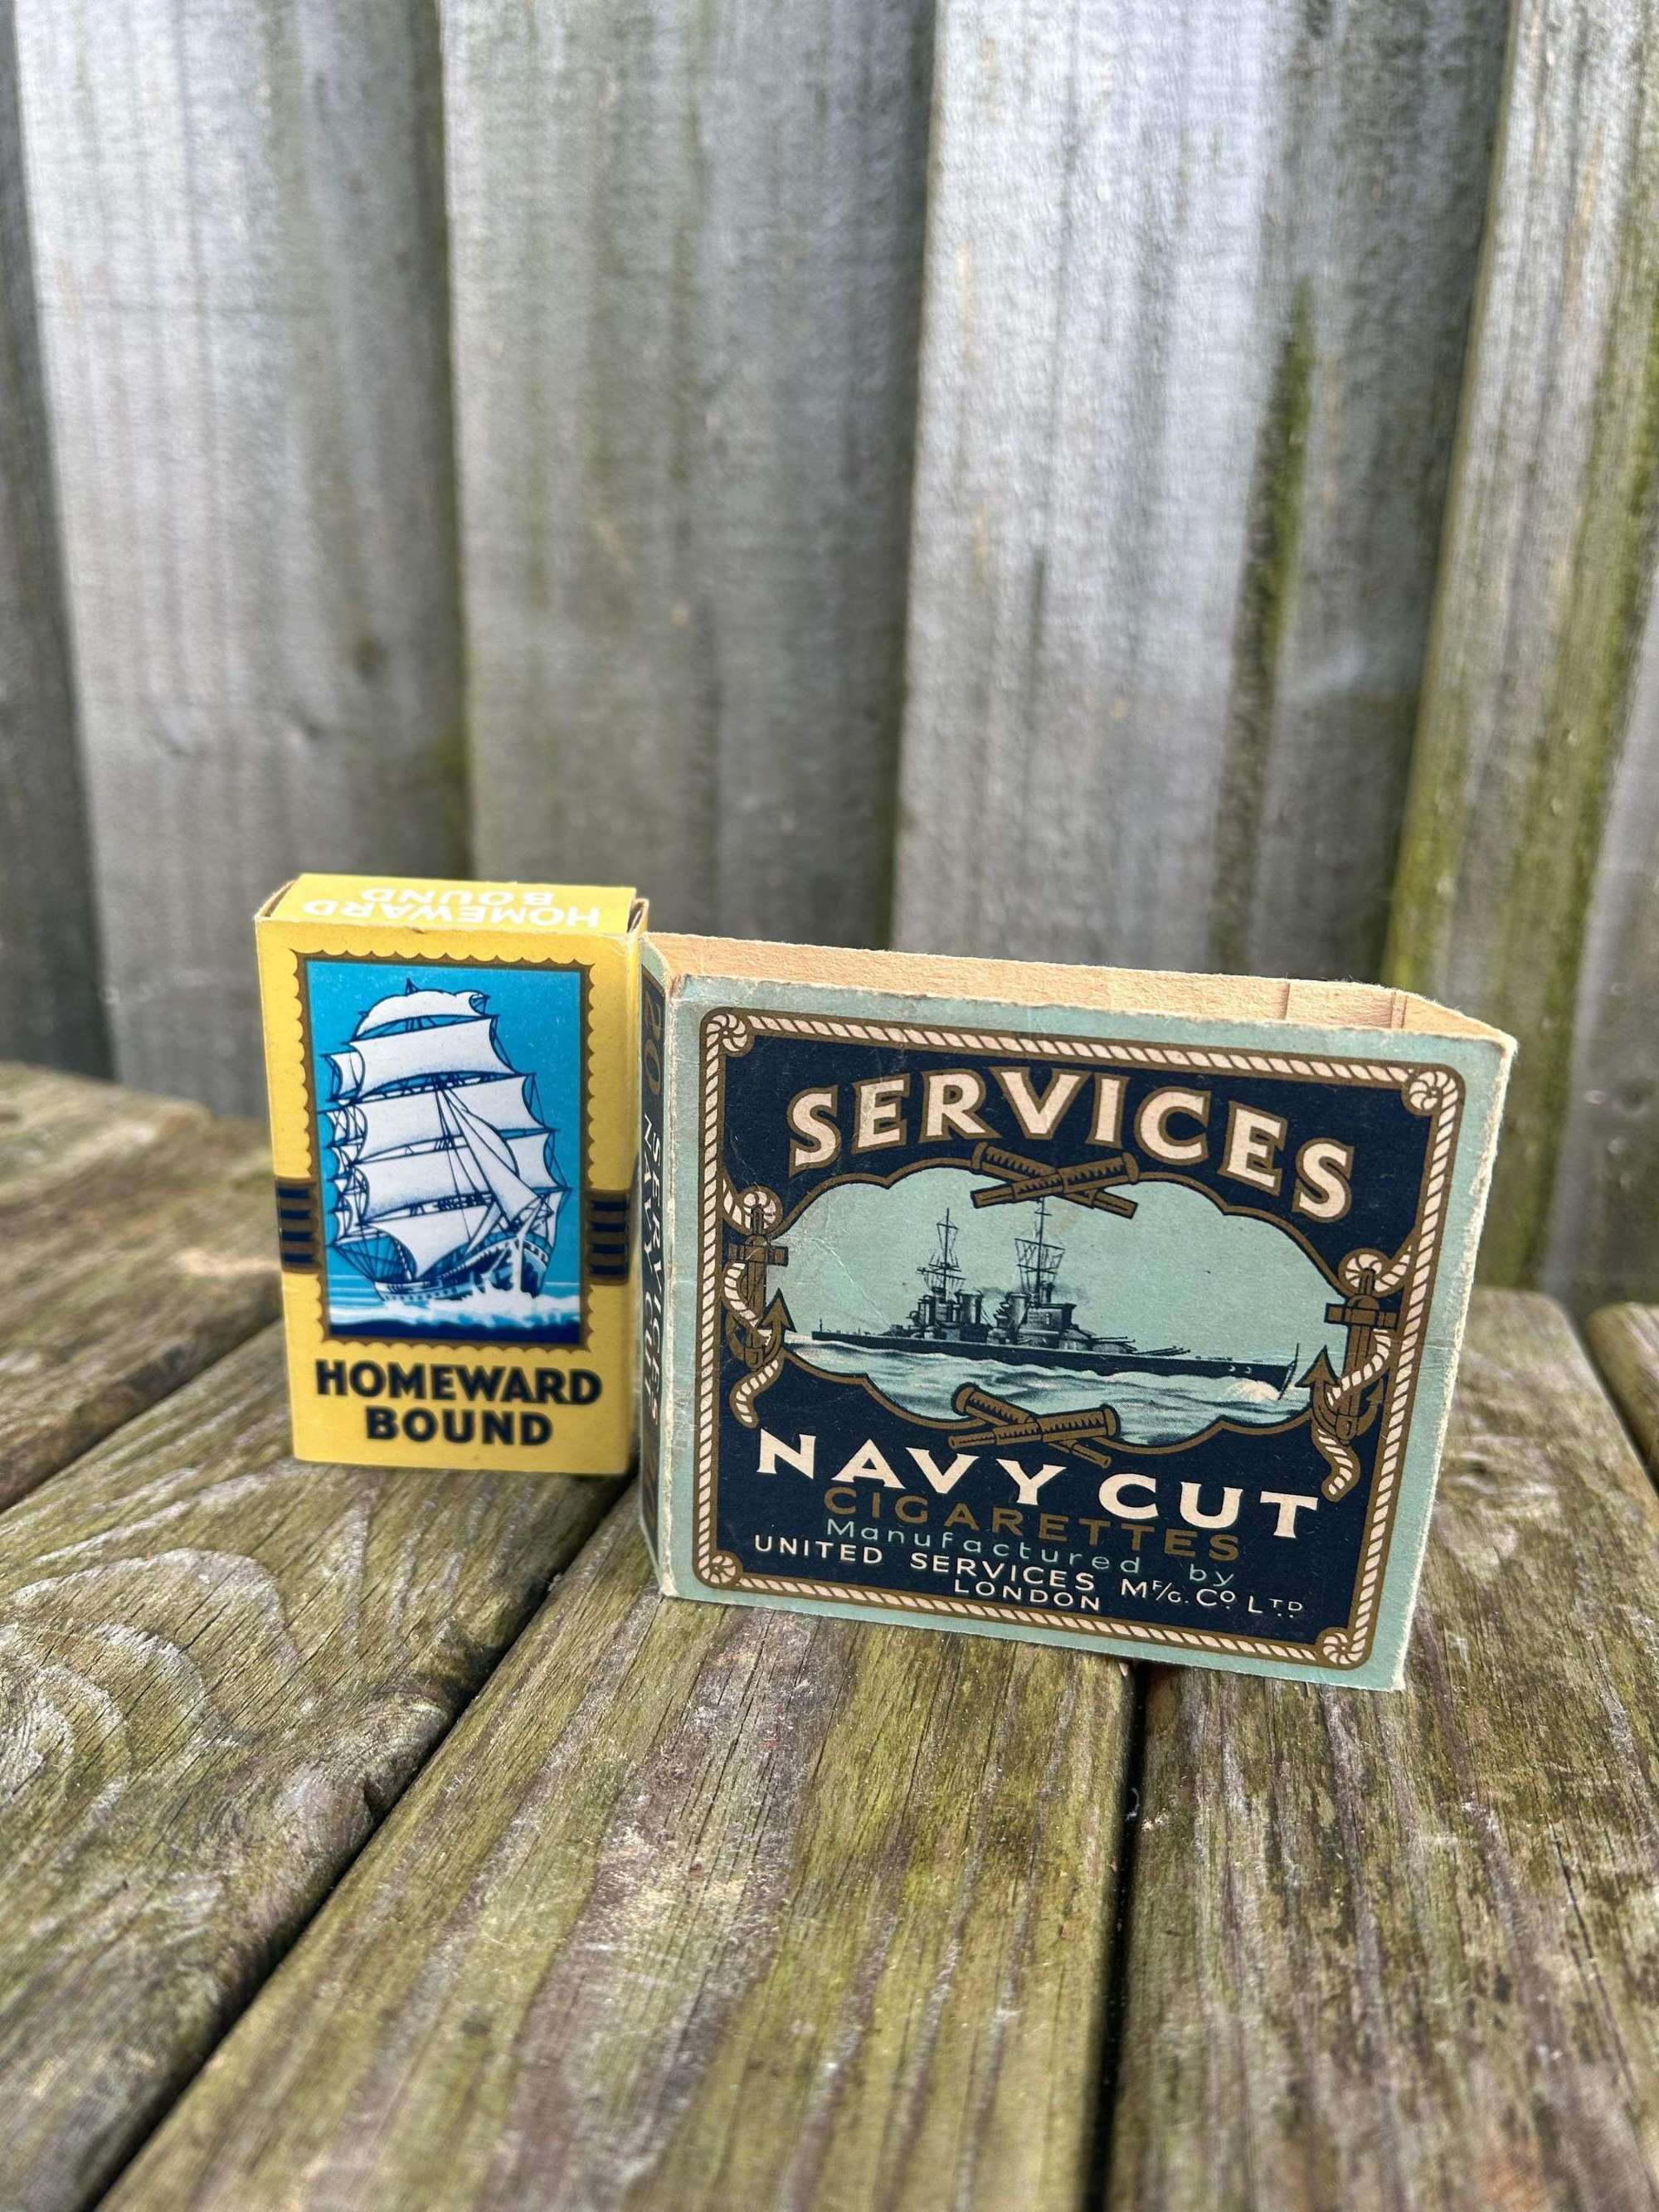 Services and homeward bound cigarette packets